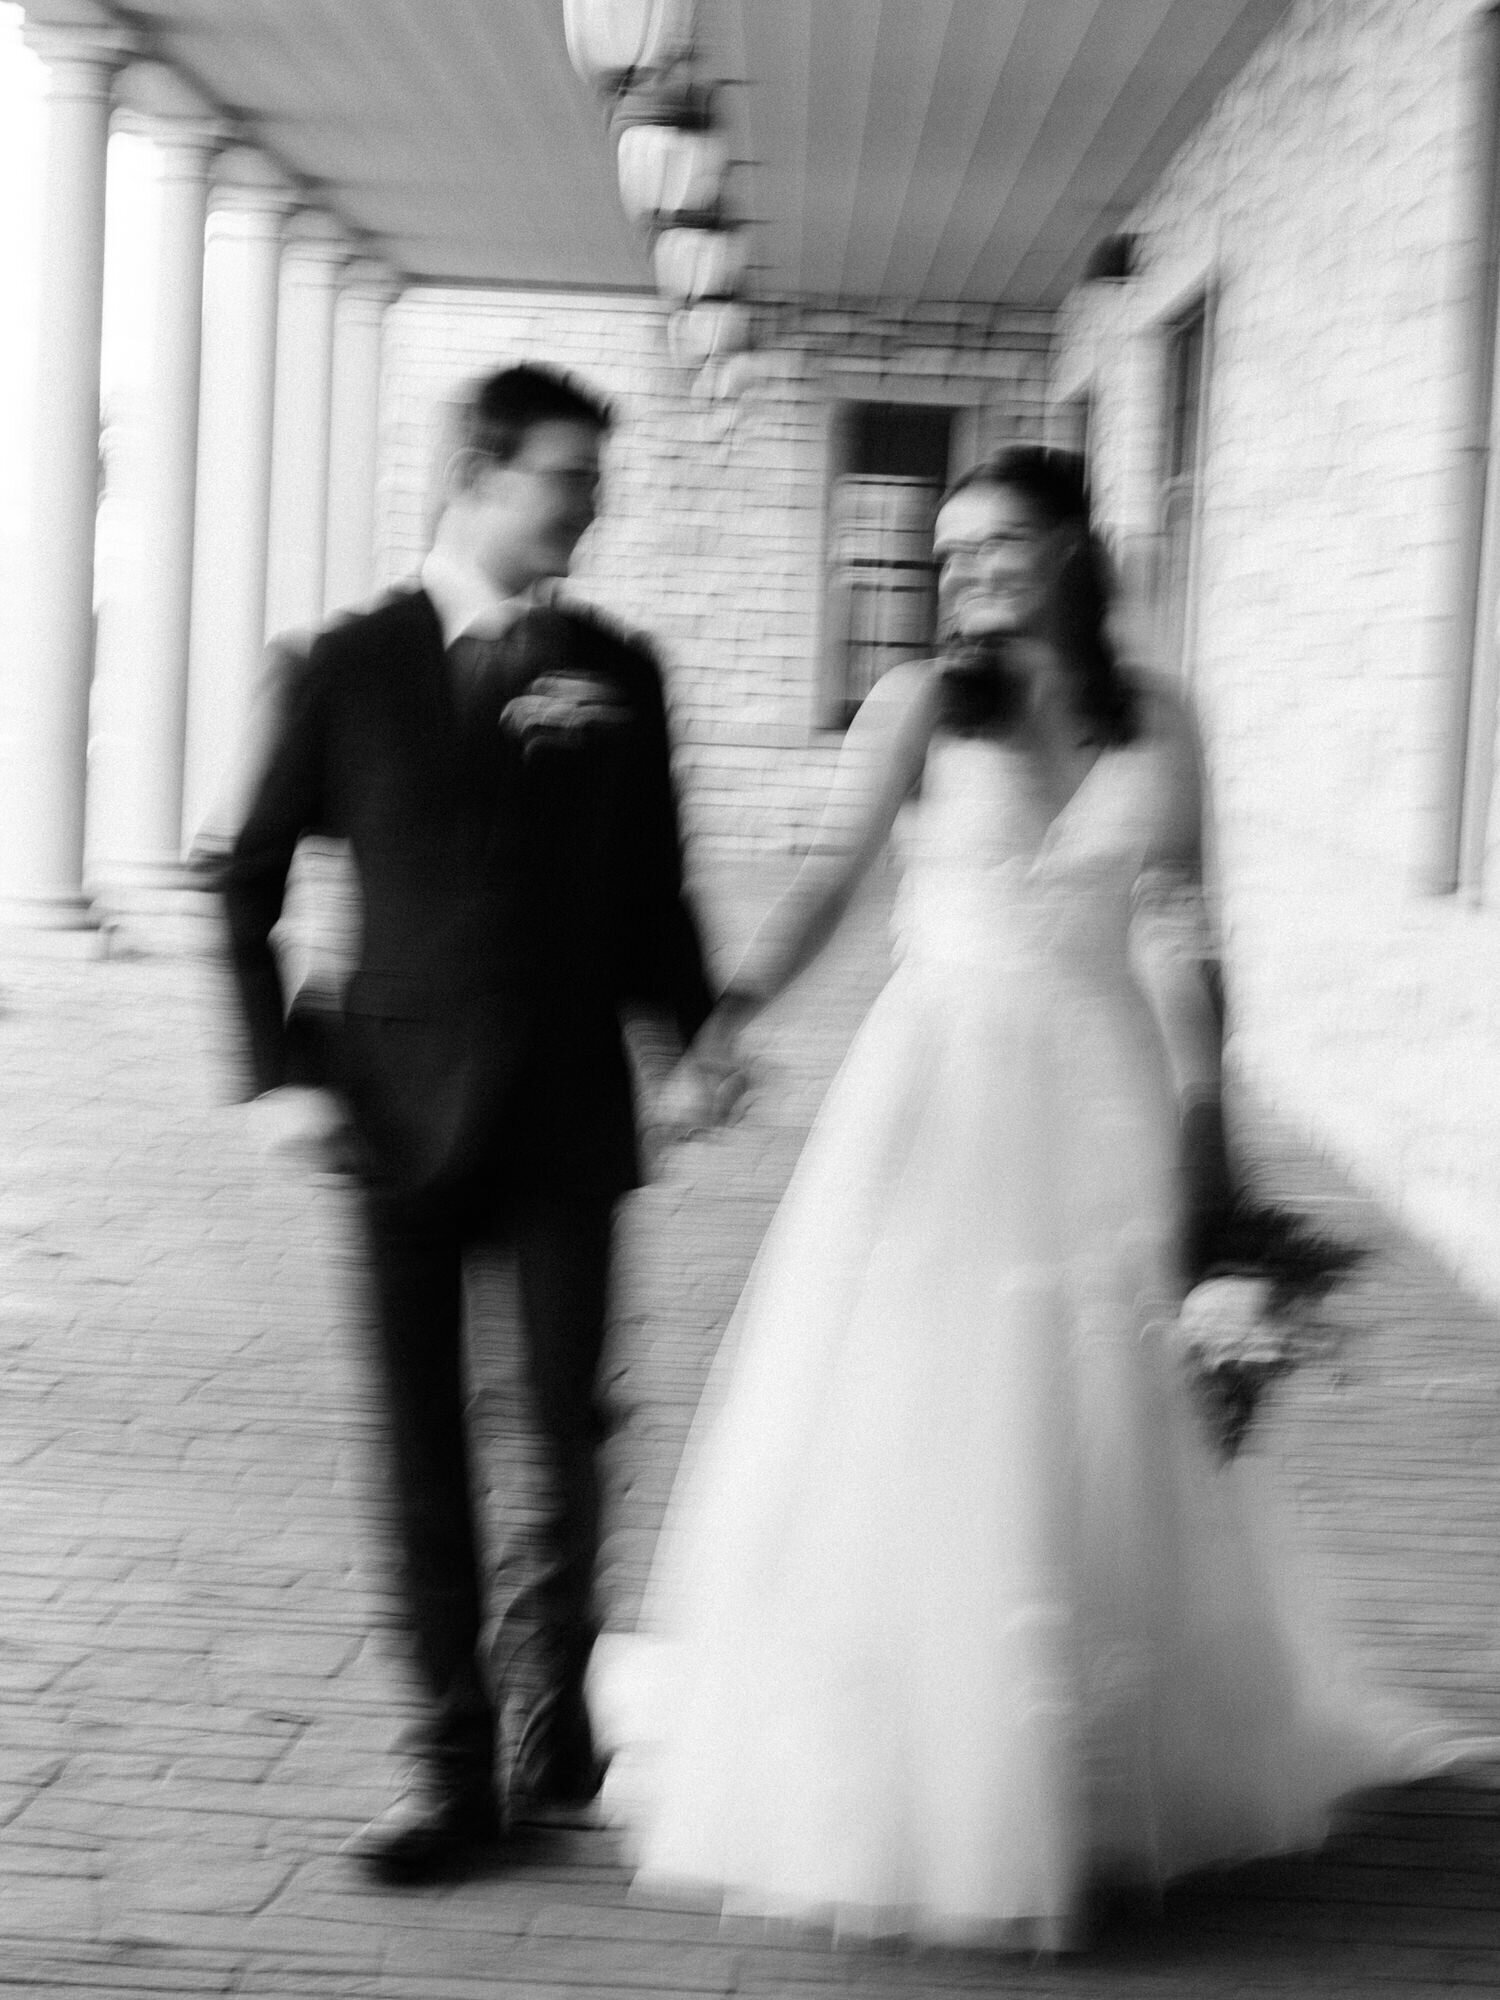 This is an artistic, editorial, film inspired image taken by KD Captures, a wedding photography team in Austin. The image features a bride and a groom walking while looking at each other. The image is black and white, and has a motion blur effect.